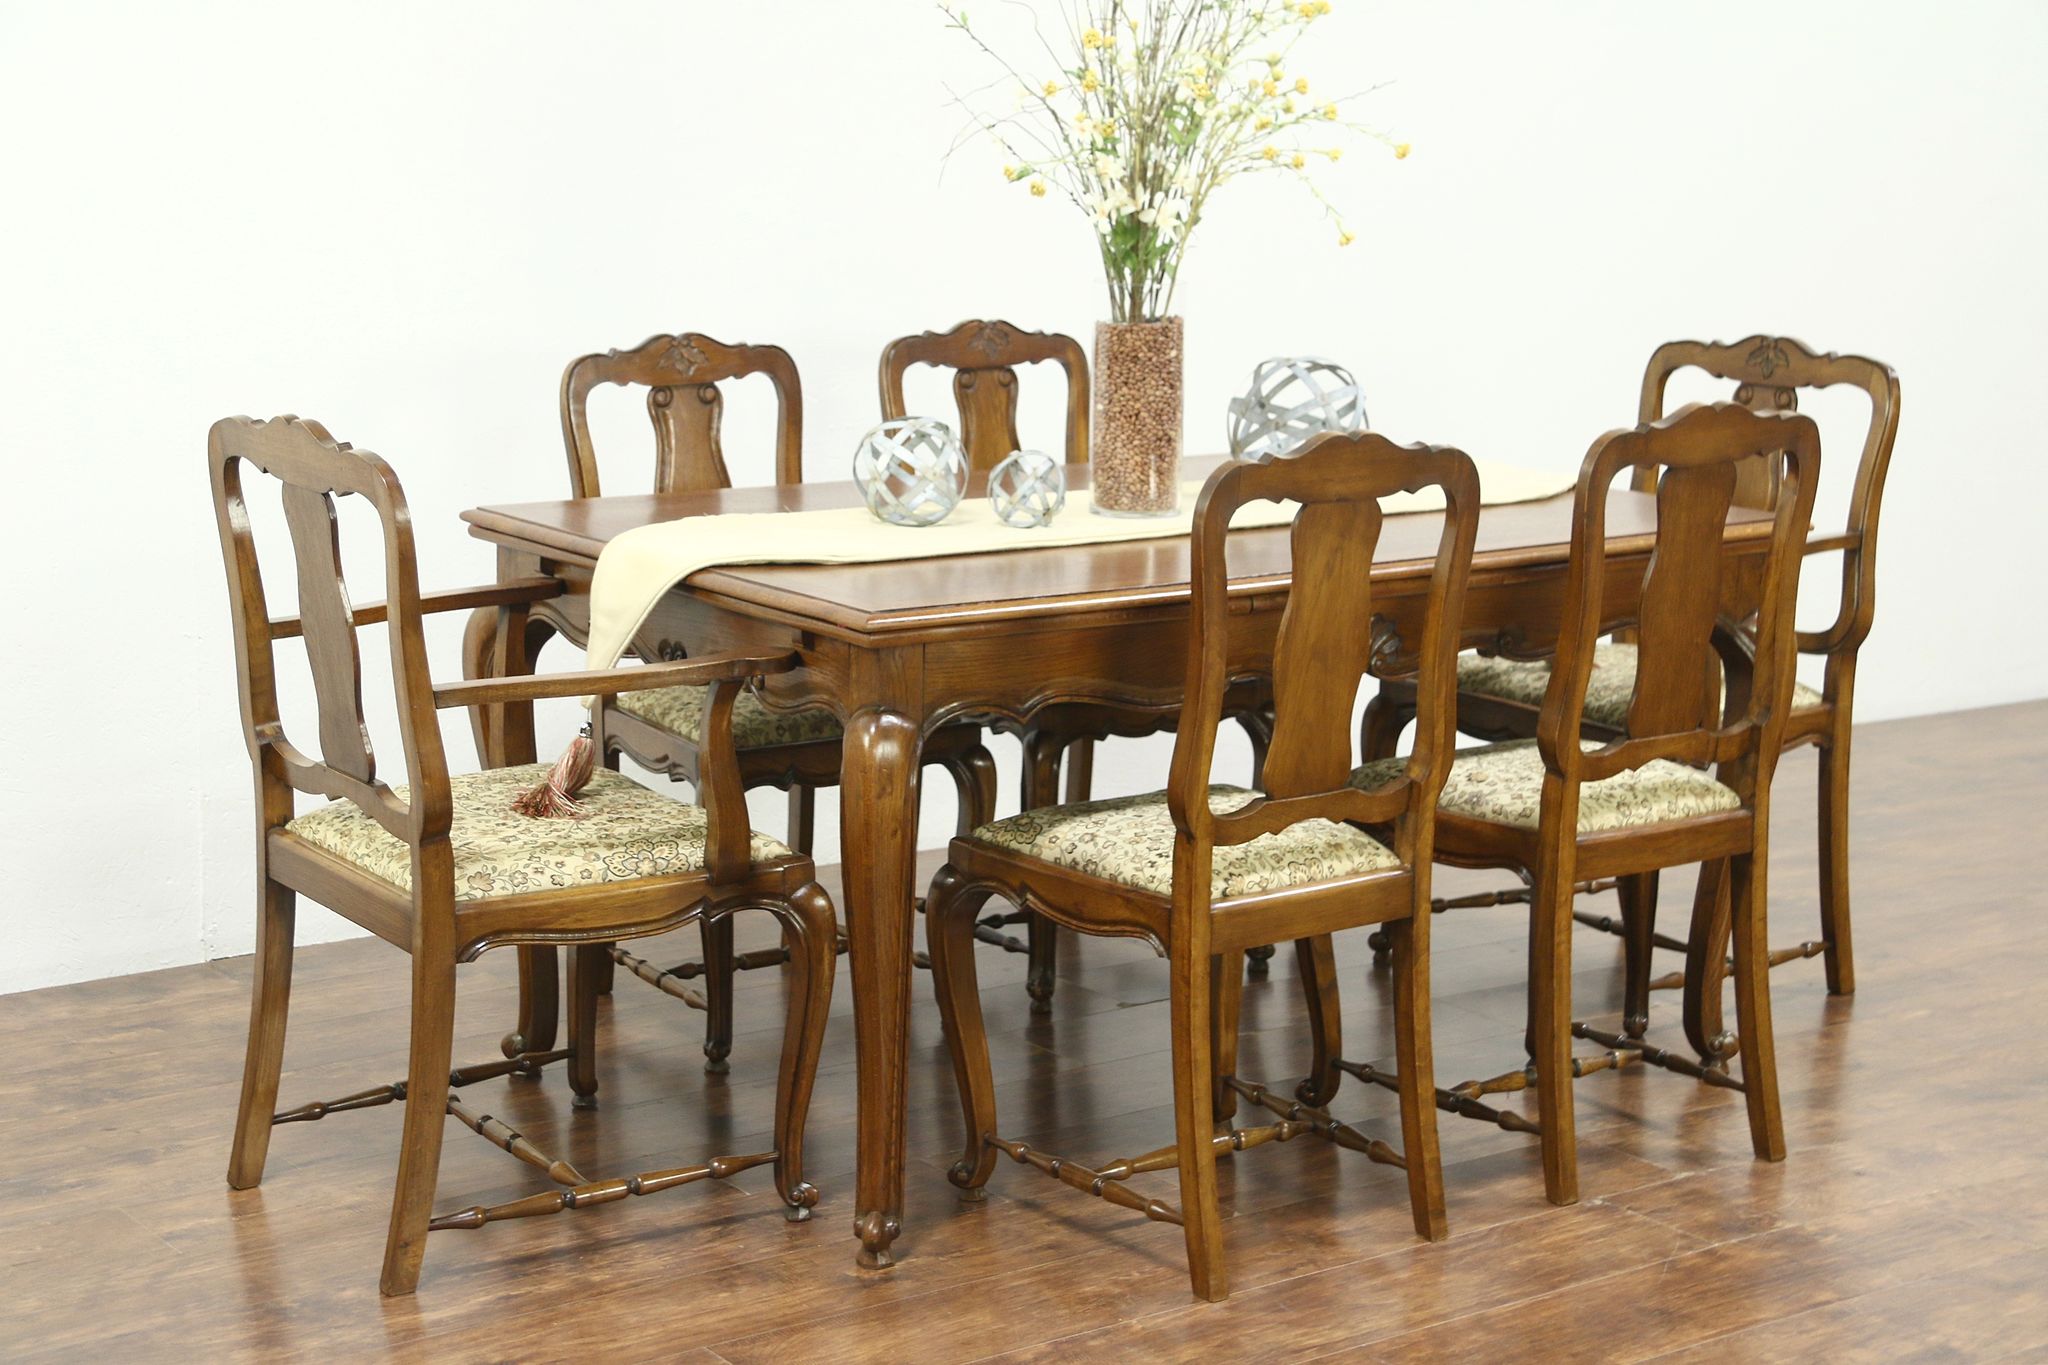 Sold Country French Vintage Oak Dining Set Table 6 Chairs New Upholstery 28809 Harp Gallery Antiques Furniture